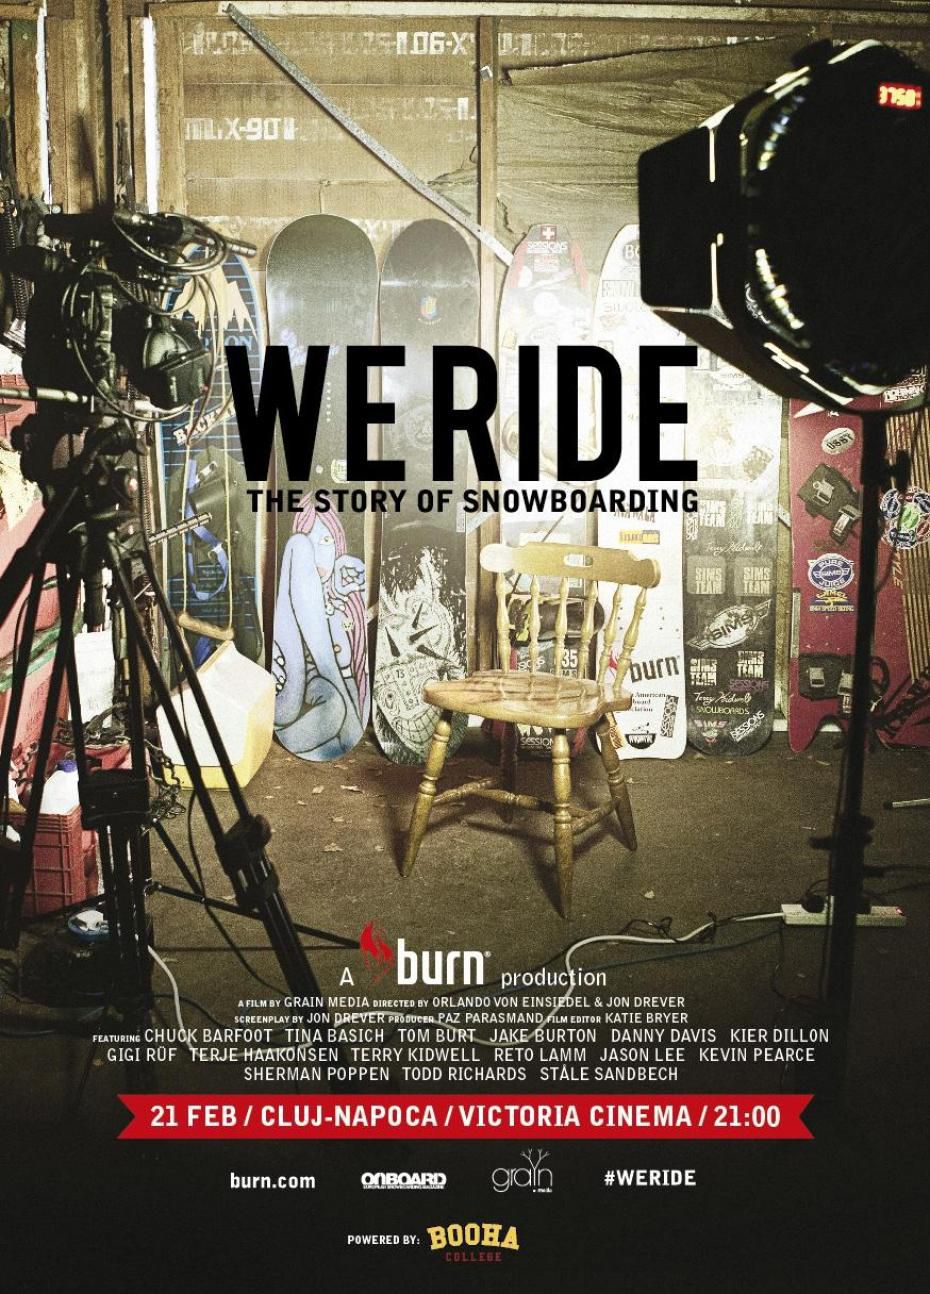 We Ride - The Story Of Snowboarding. - Documentaire (2013) streaming VF gratuit complet